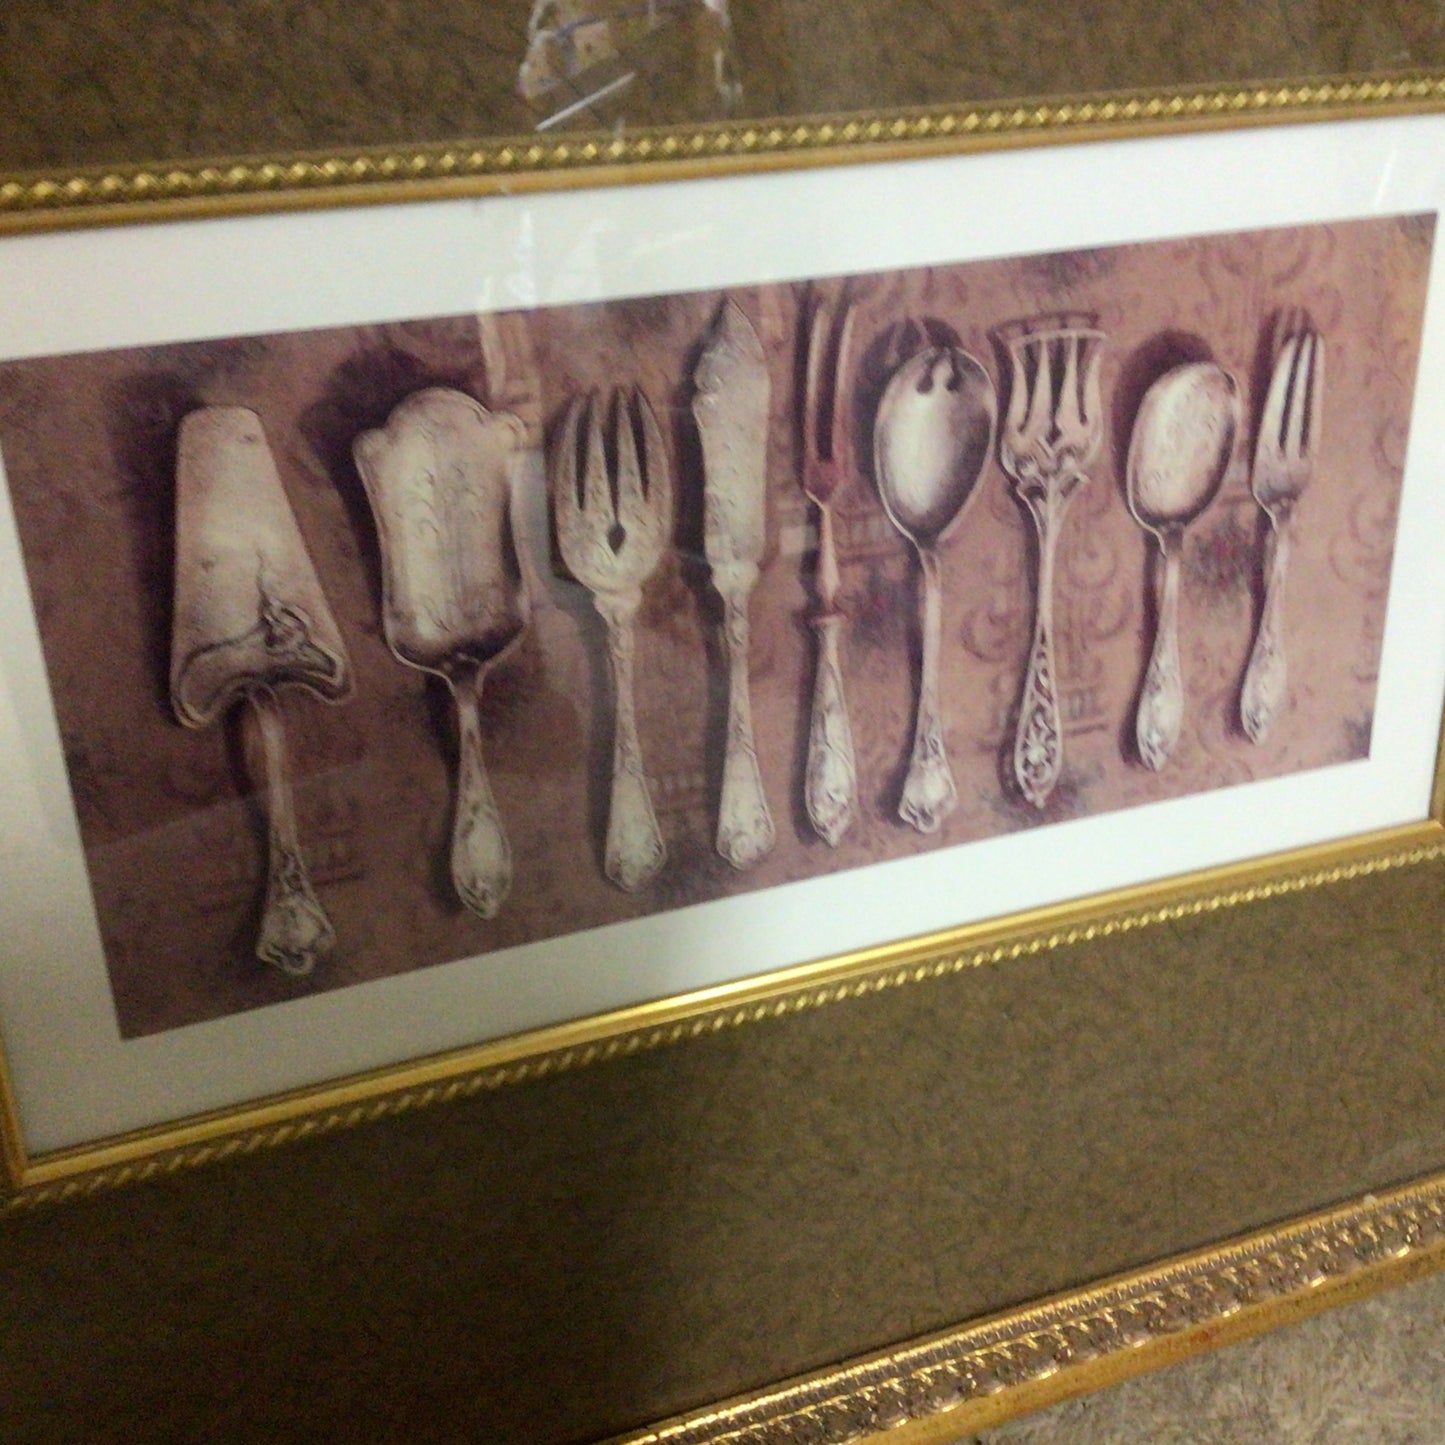 Framed and Matted Art Print “ Silverware”